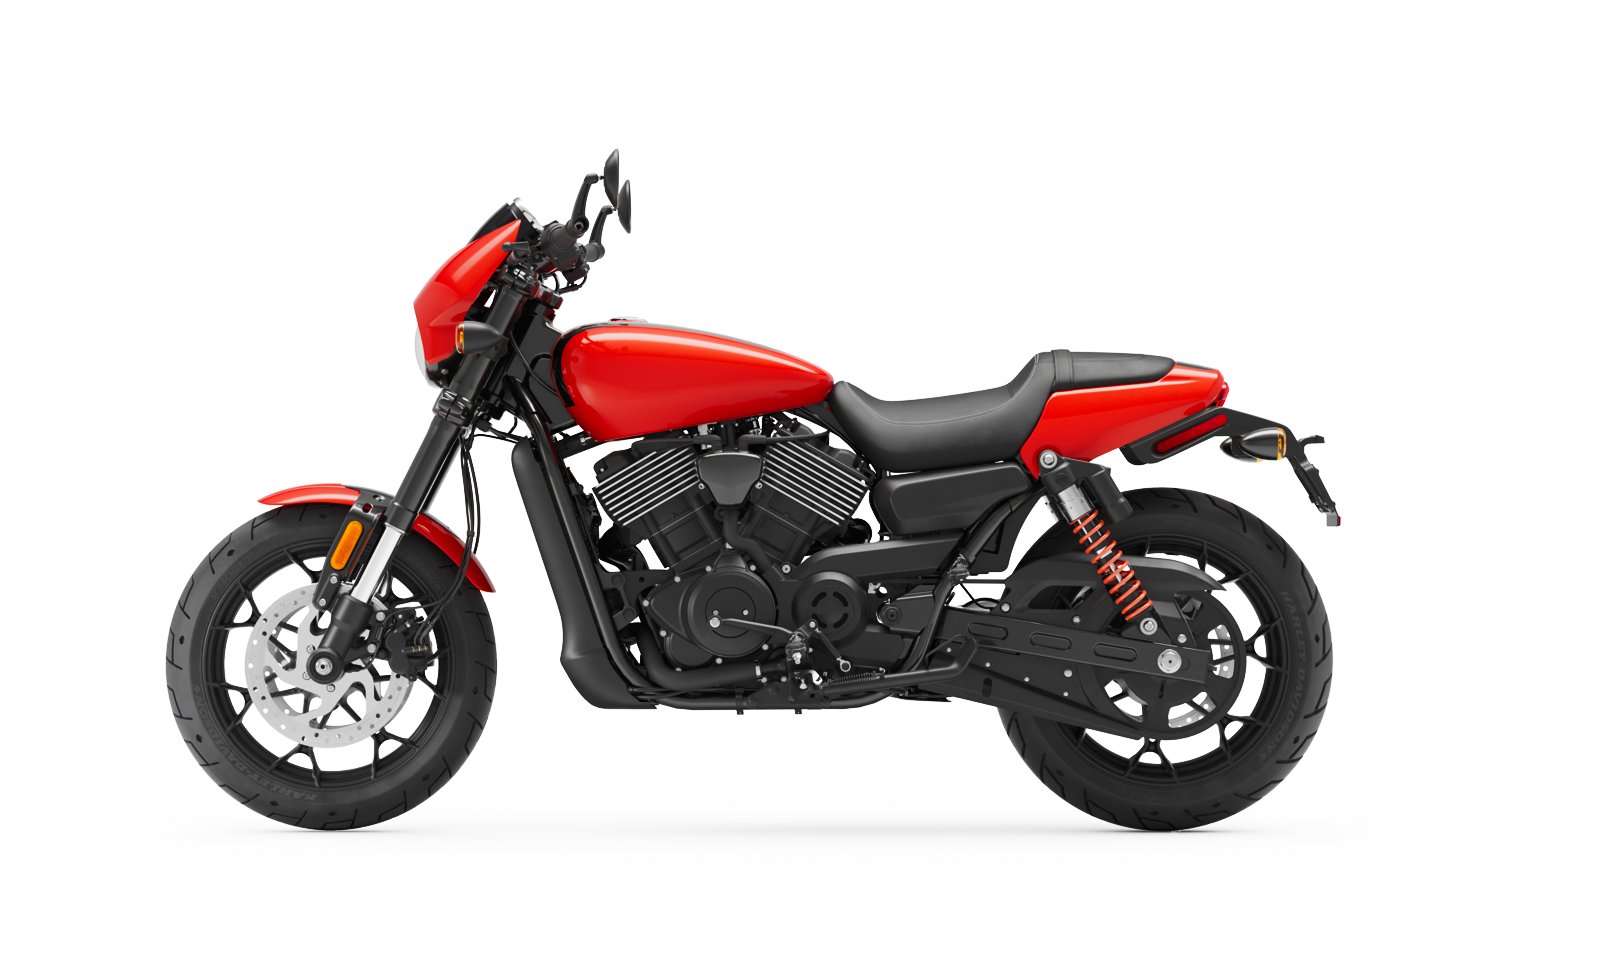 2020 Street Rod Motorcycle Harley Davidson Asia Pacific Markets